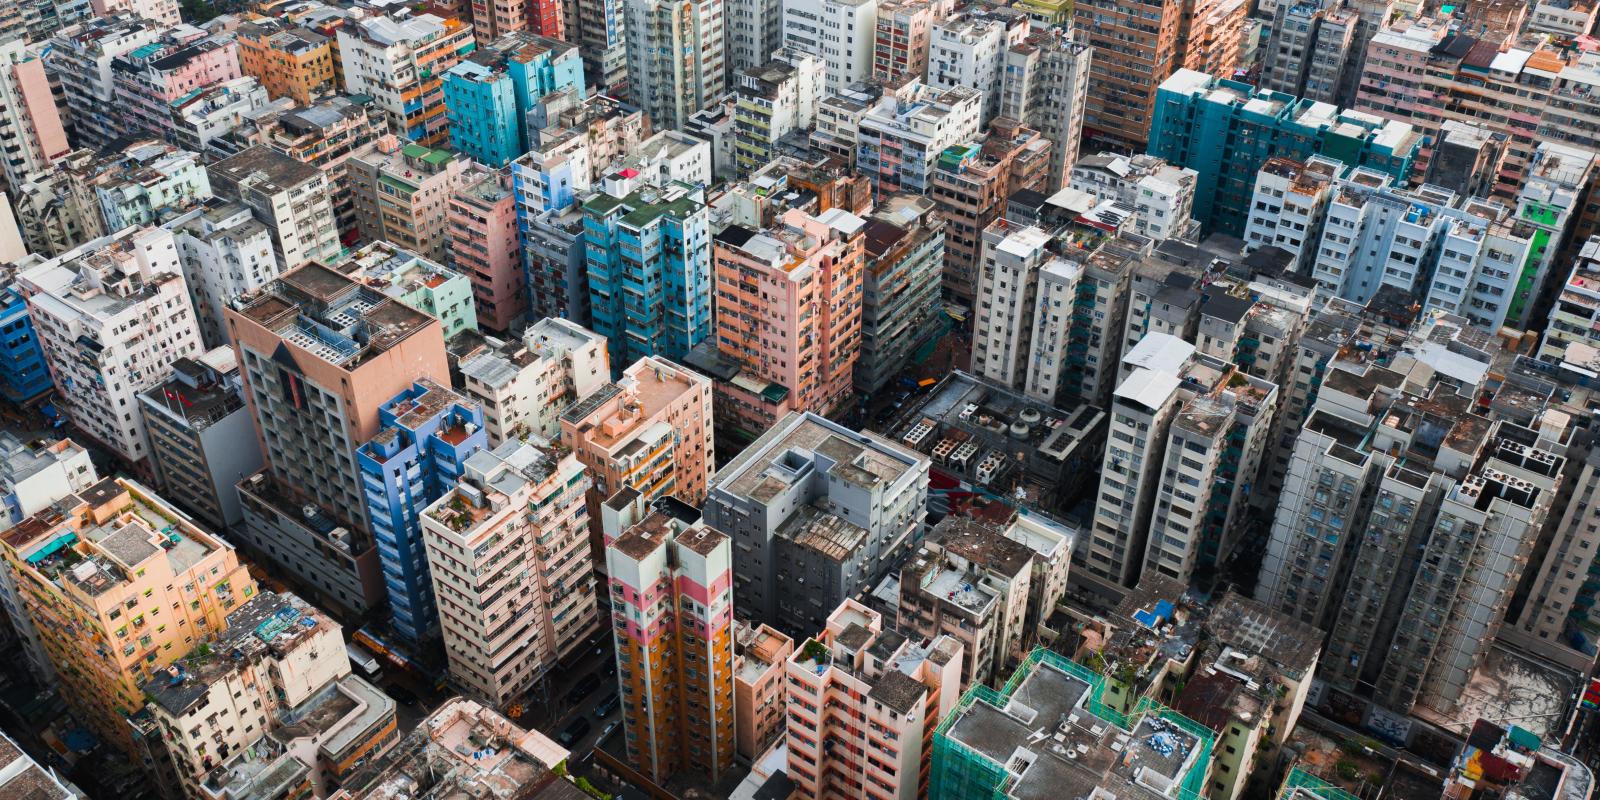 Aerial view of a densely populated area of Hong Kong